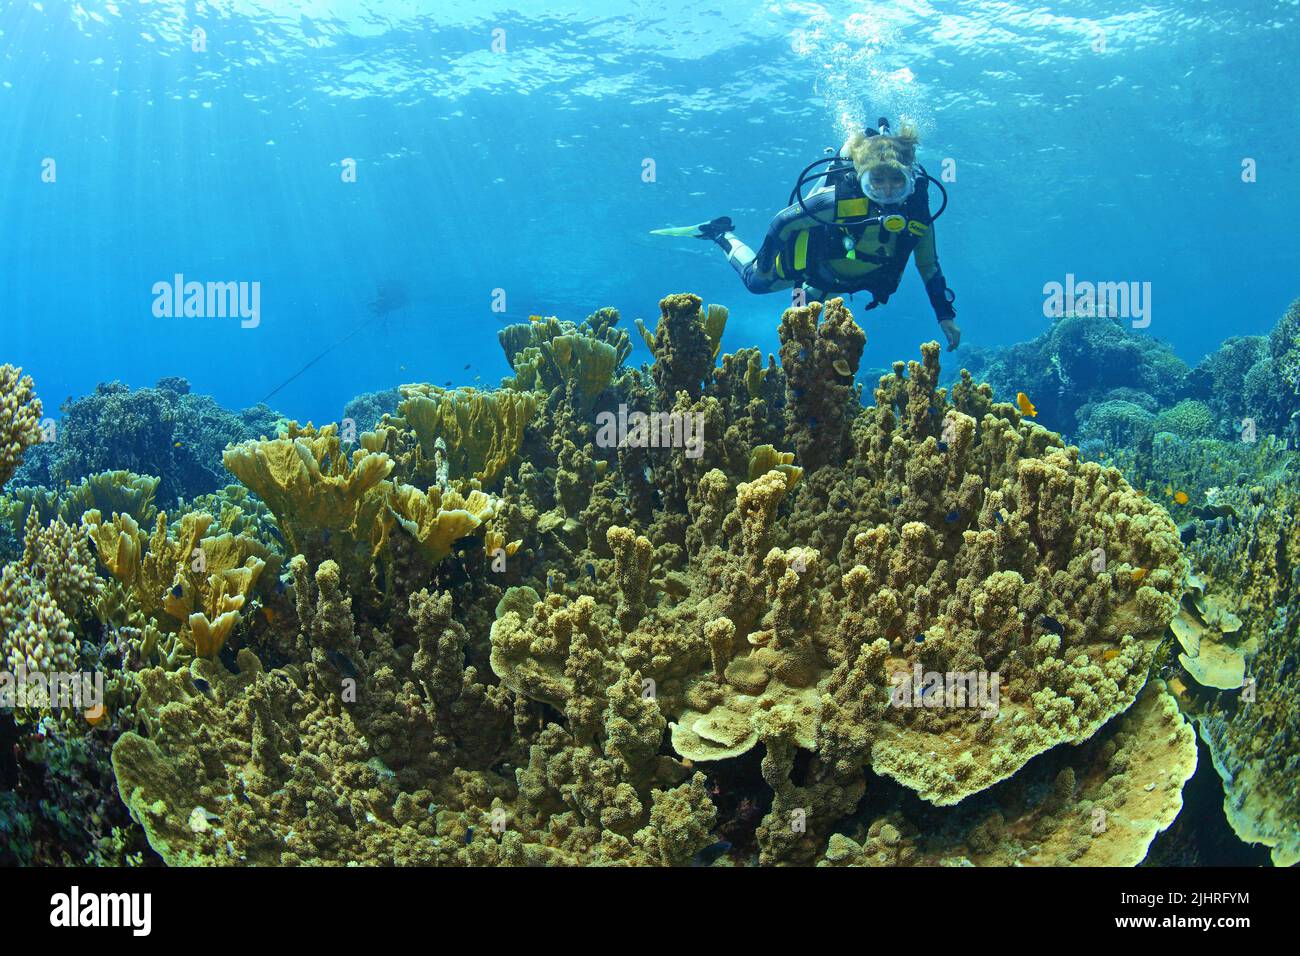 Scuba diver in a coral reef with stone corals (Scleractinia), Great Barrier Reef, Australia Stock Photo